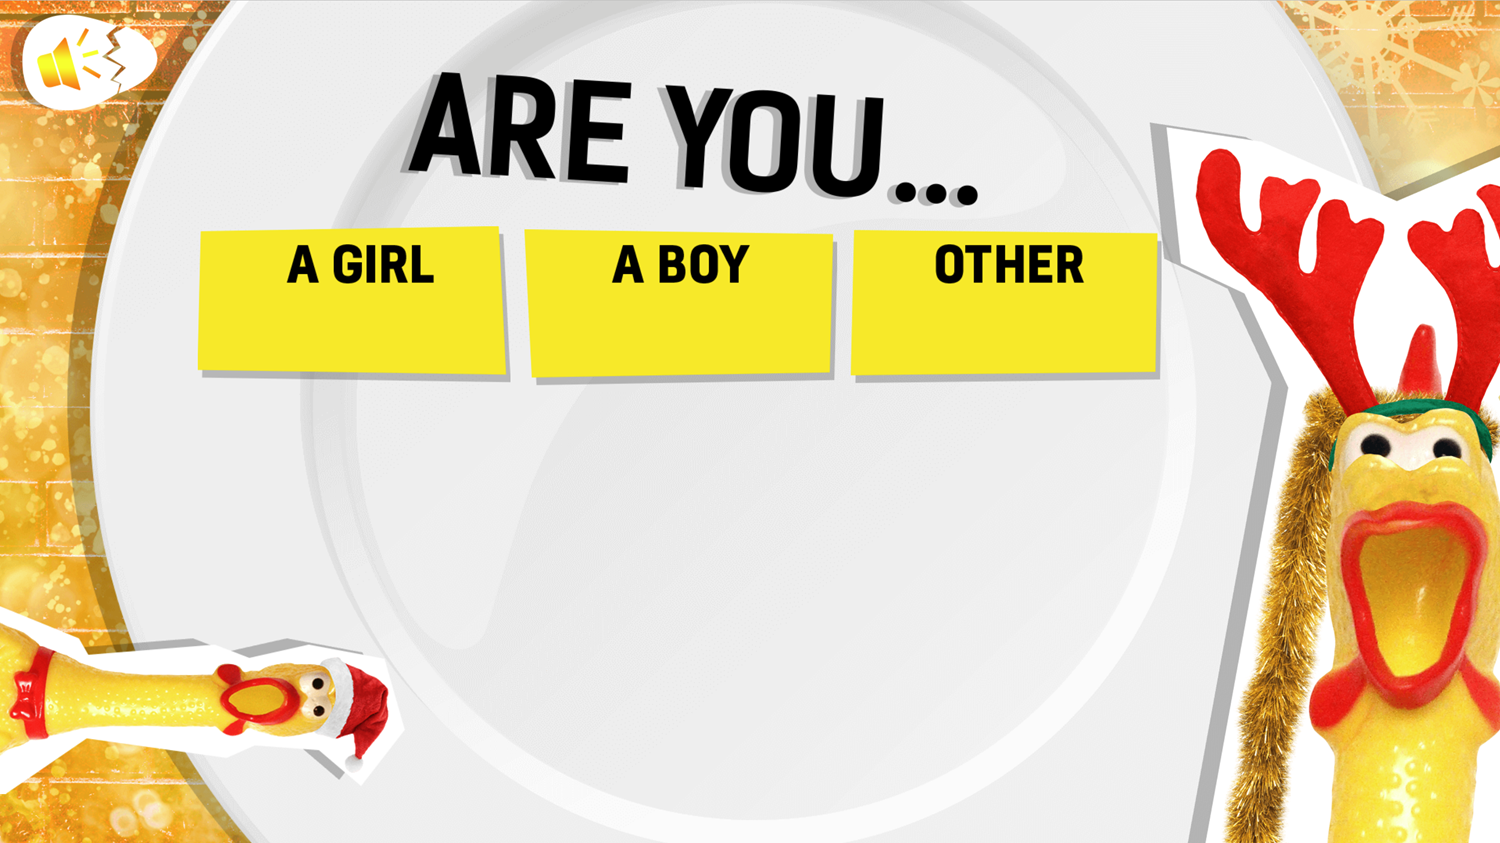 What's Your Chicken Name Game Gender Question Screen Screenshot.